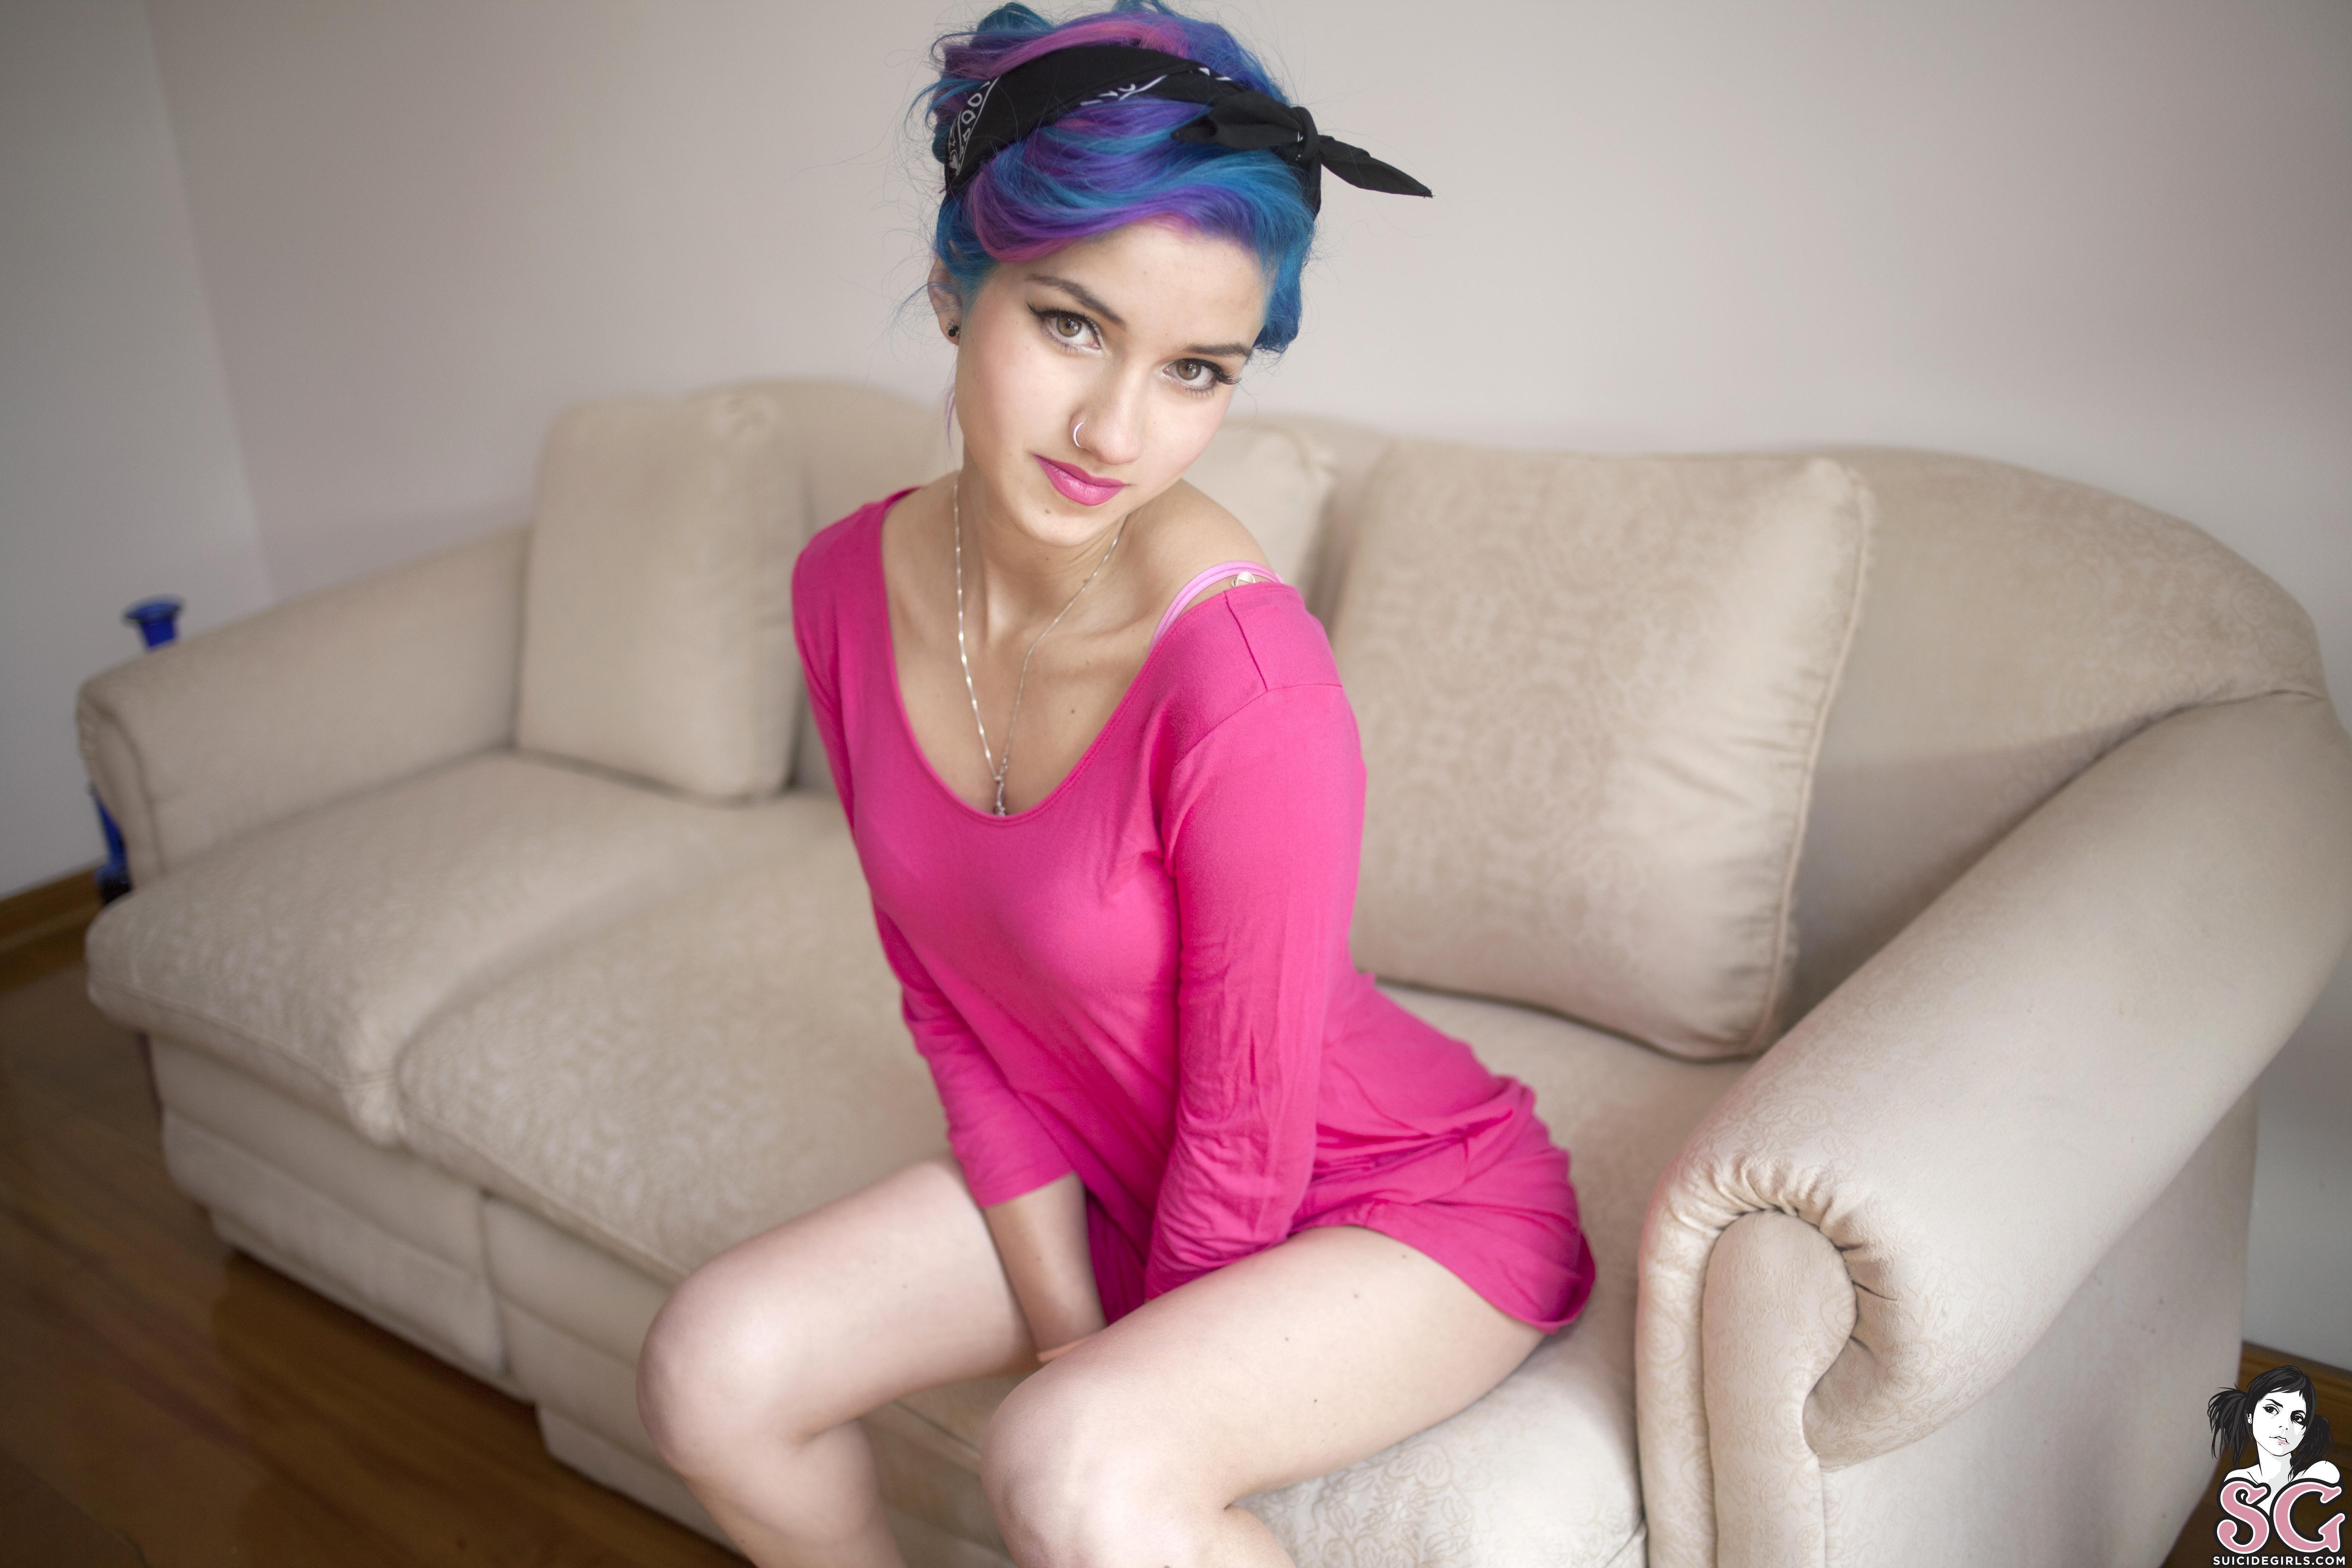 People 5616x3744 Fay Suicide Suicide Girls nose ring pierced nose Latinas Chilean Chilean women women women indoors indoors sitting multi-colored hair white couch pink lipstick model looking at viewer makeup lipstick watermarked